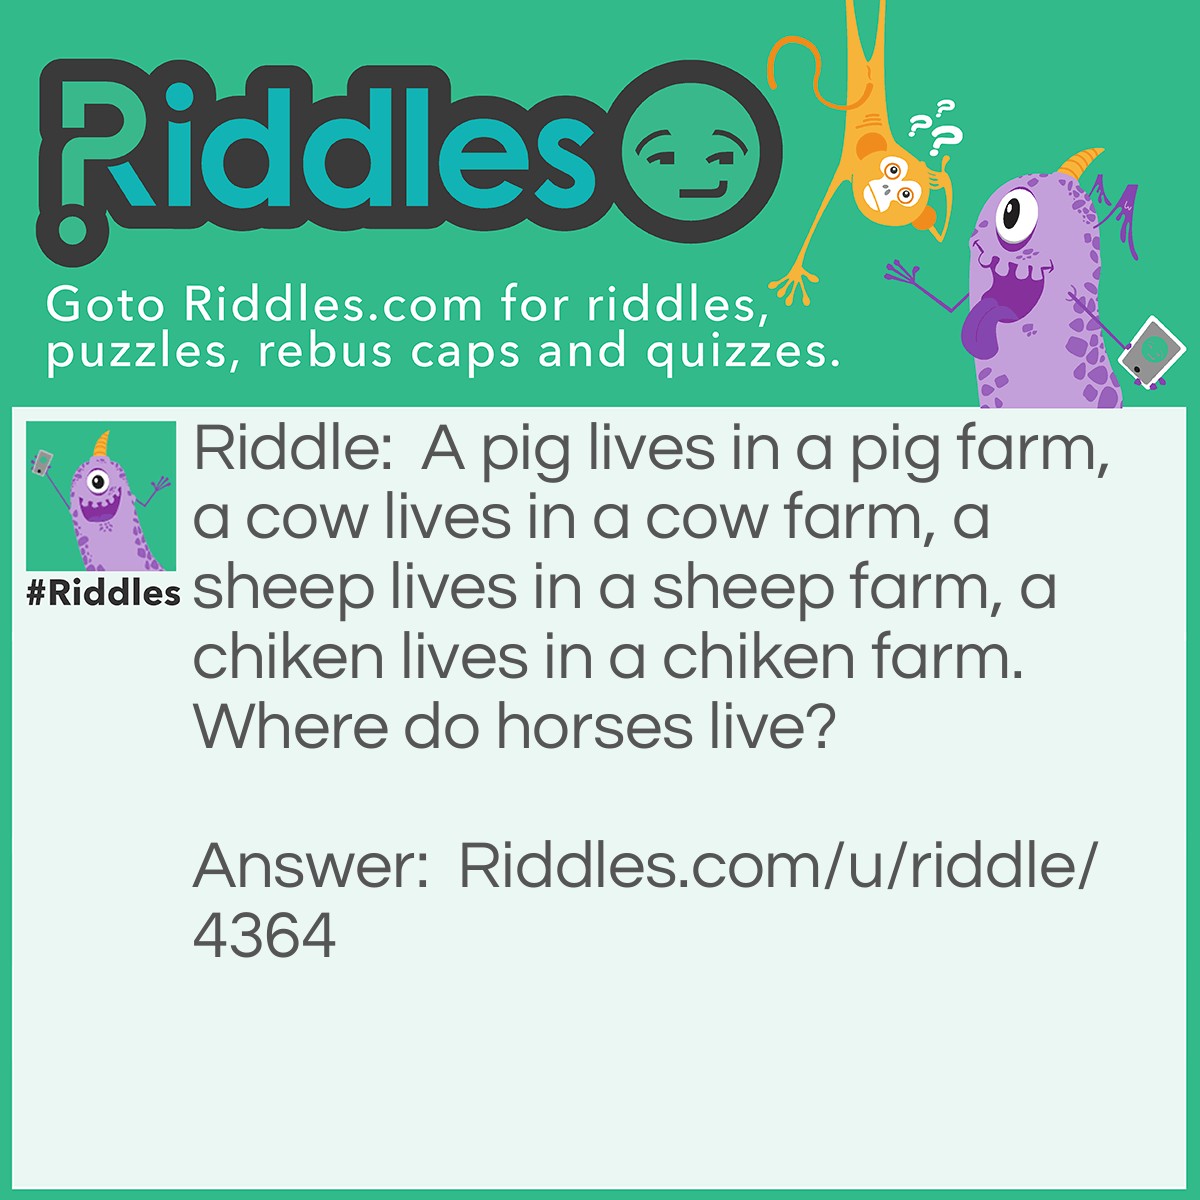 Riddle: A pig lives in a pig farm, a cow lives in a cow farm, a sheep lives in a sheep farm, a chiken lives in a chiken farm. Where do horses live? Answer: On a ranch.